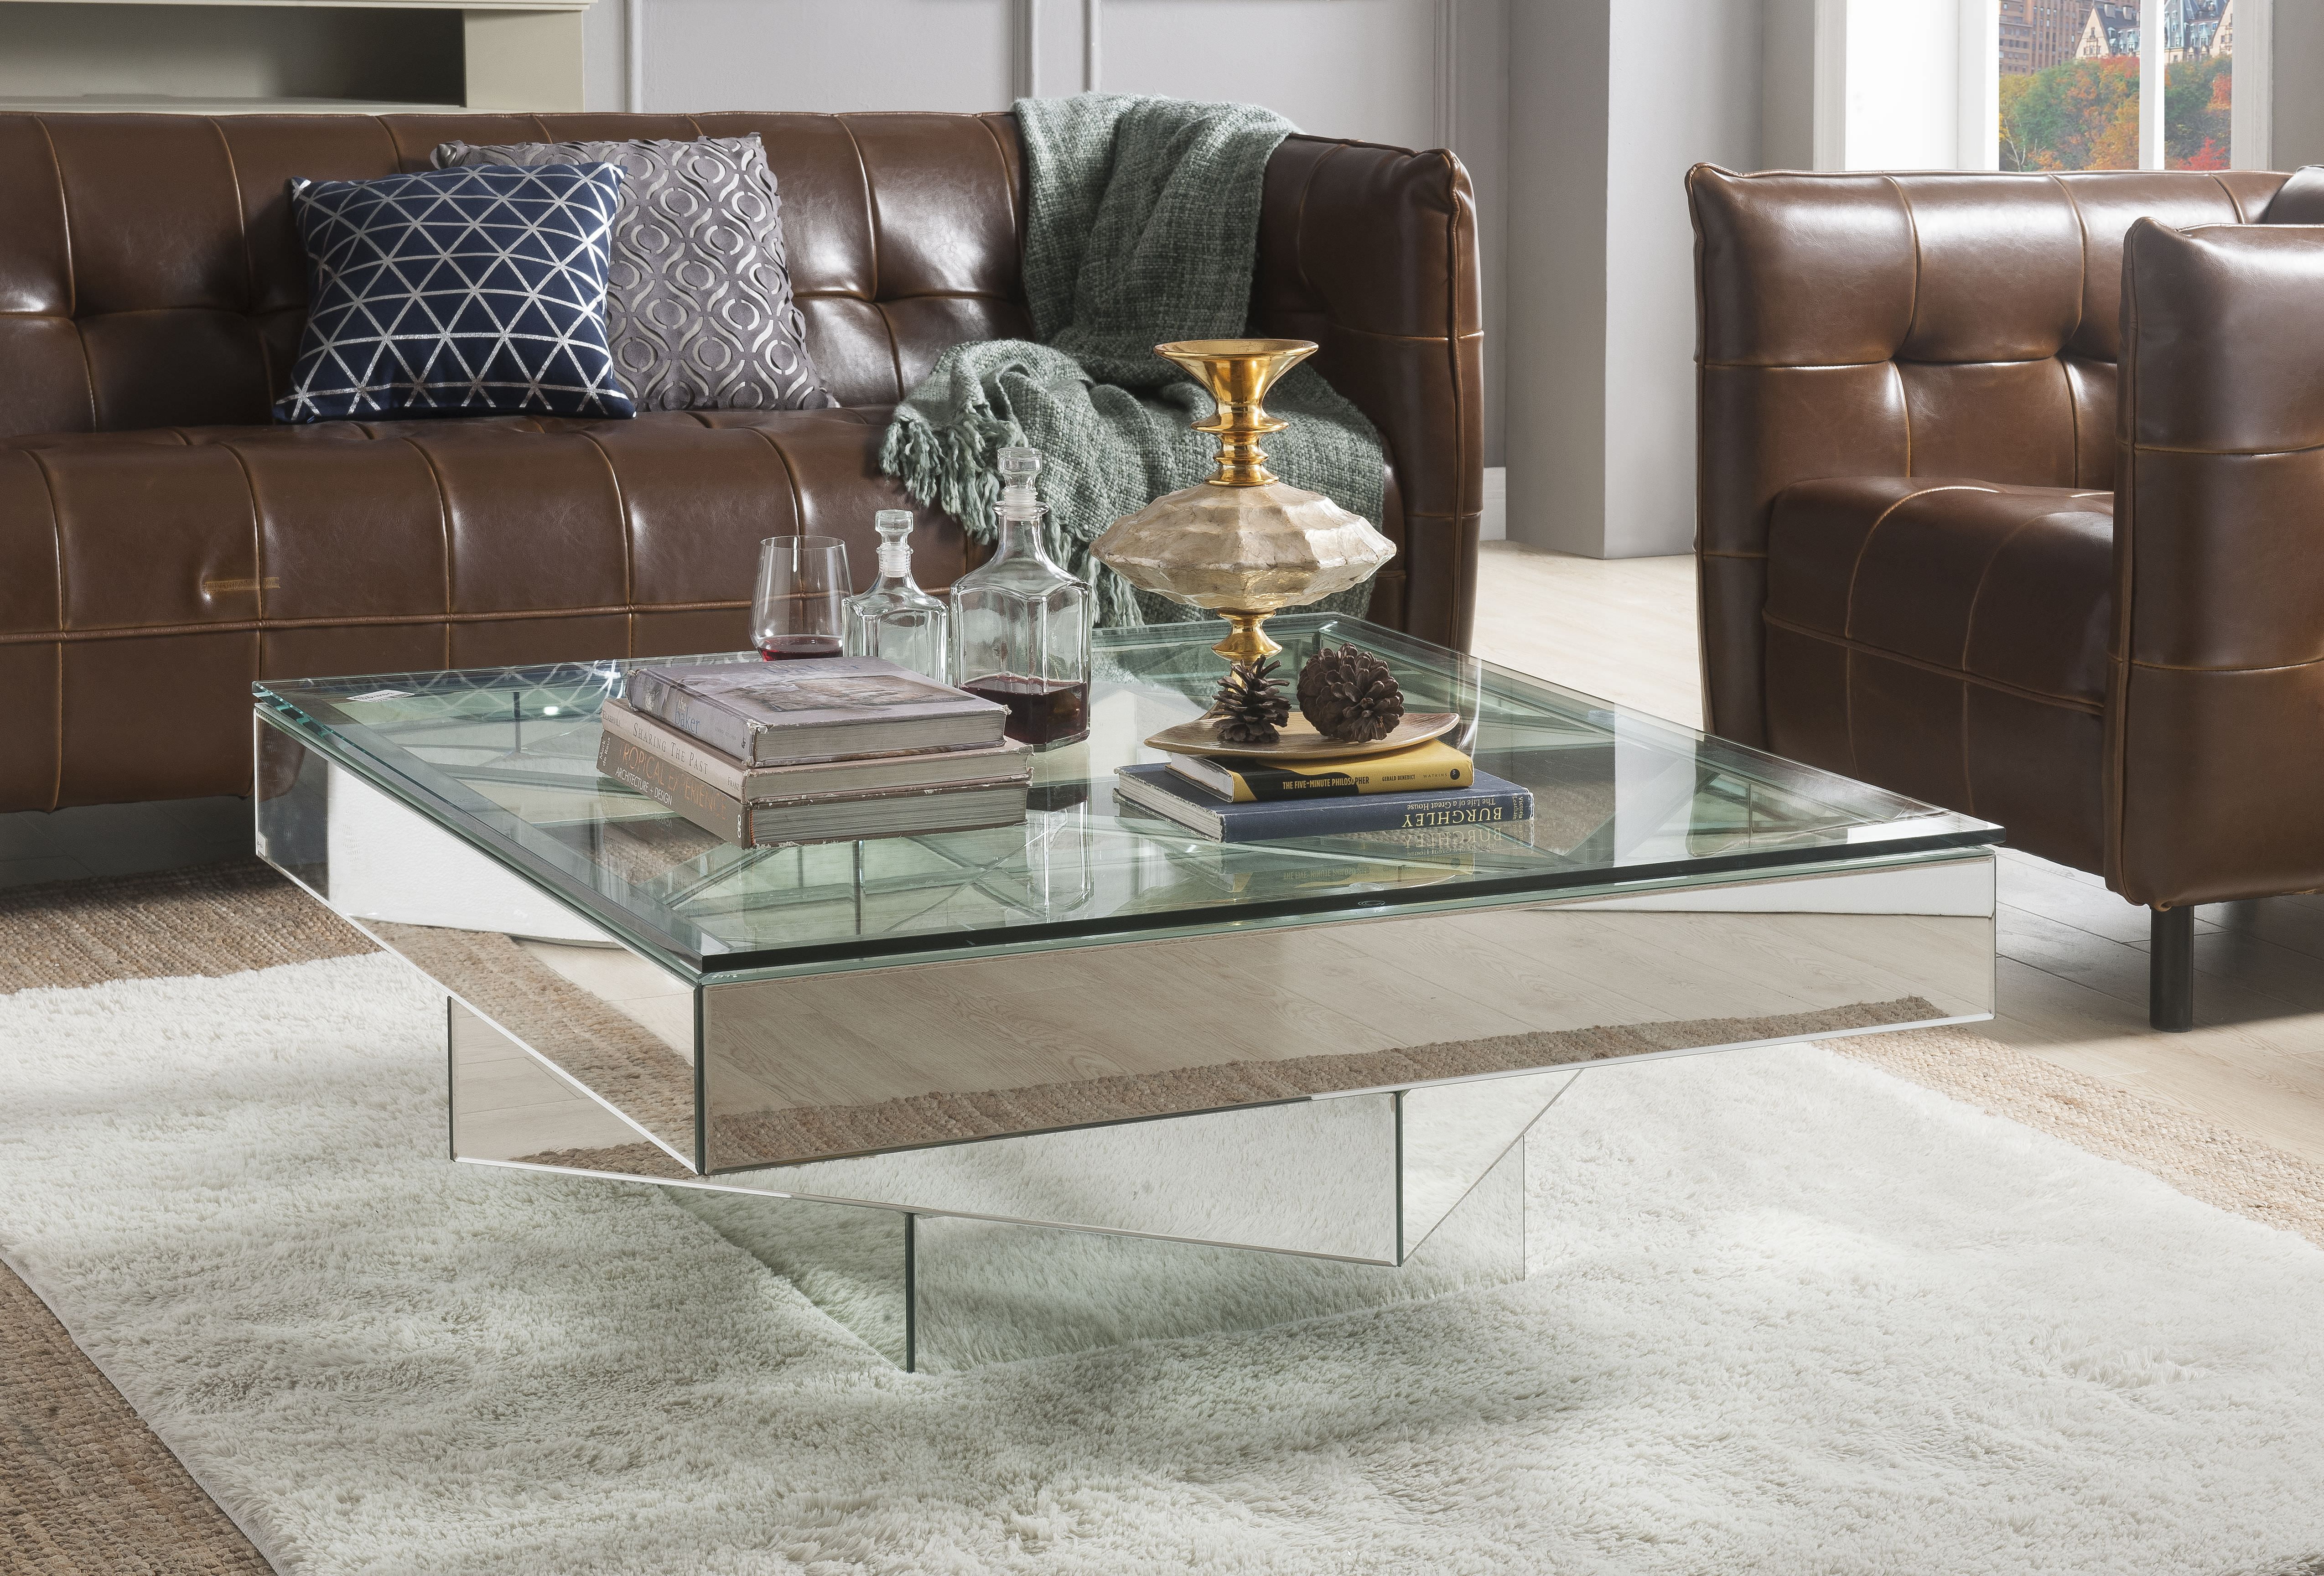 Picture of ACME 80270 Meria Coffee Table - Mirrored - 15 x 40 x 40 in.